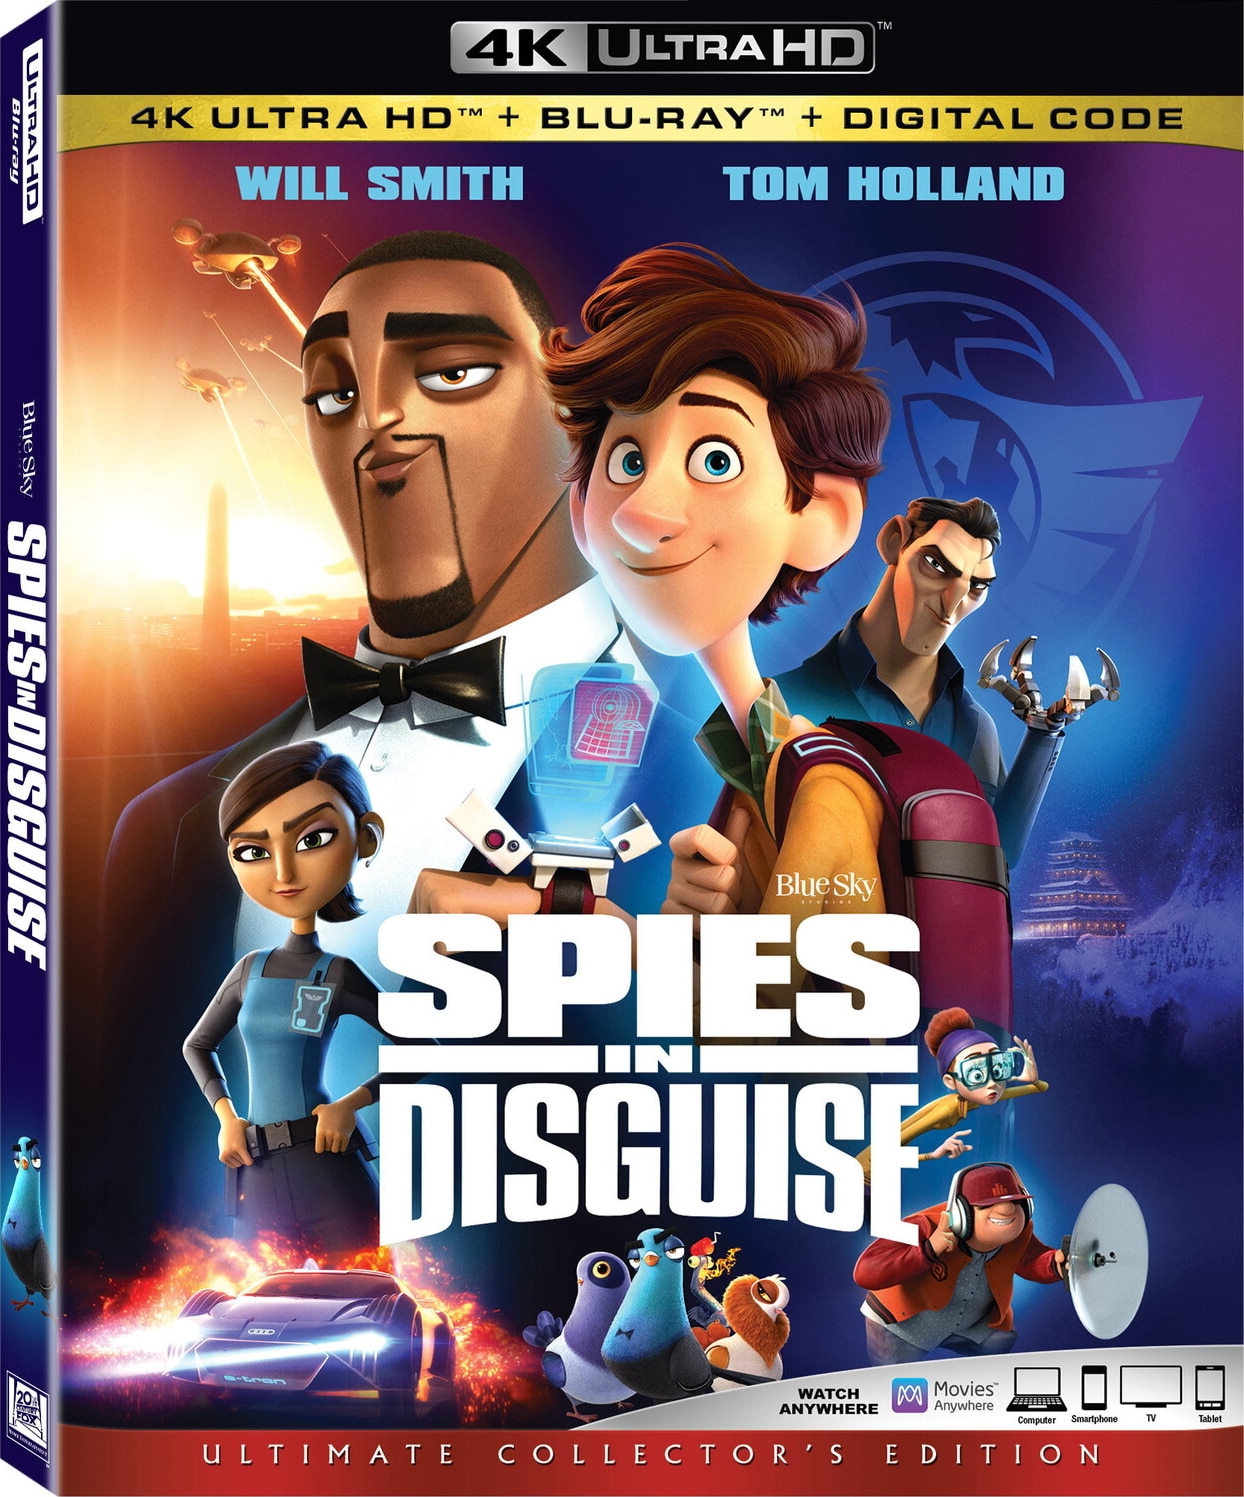 Spies In Disguise is sneaking in homes on Digital, Blu-ray, and 4K Ultra HD